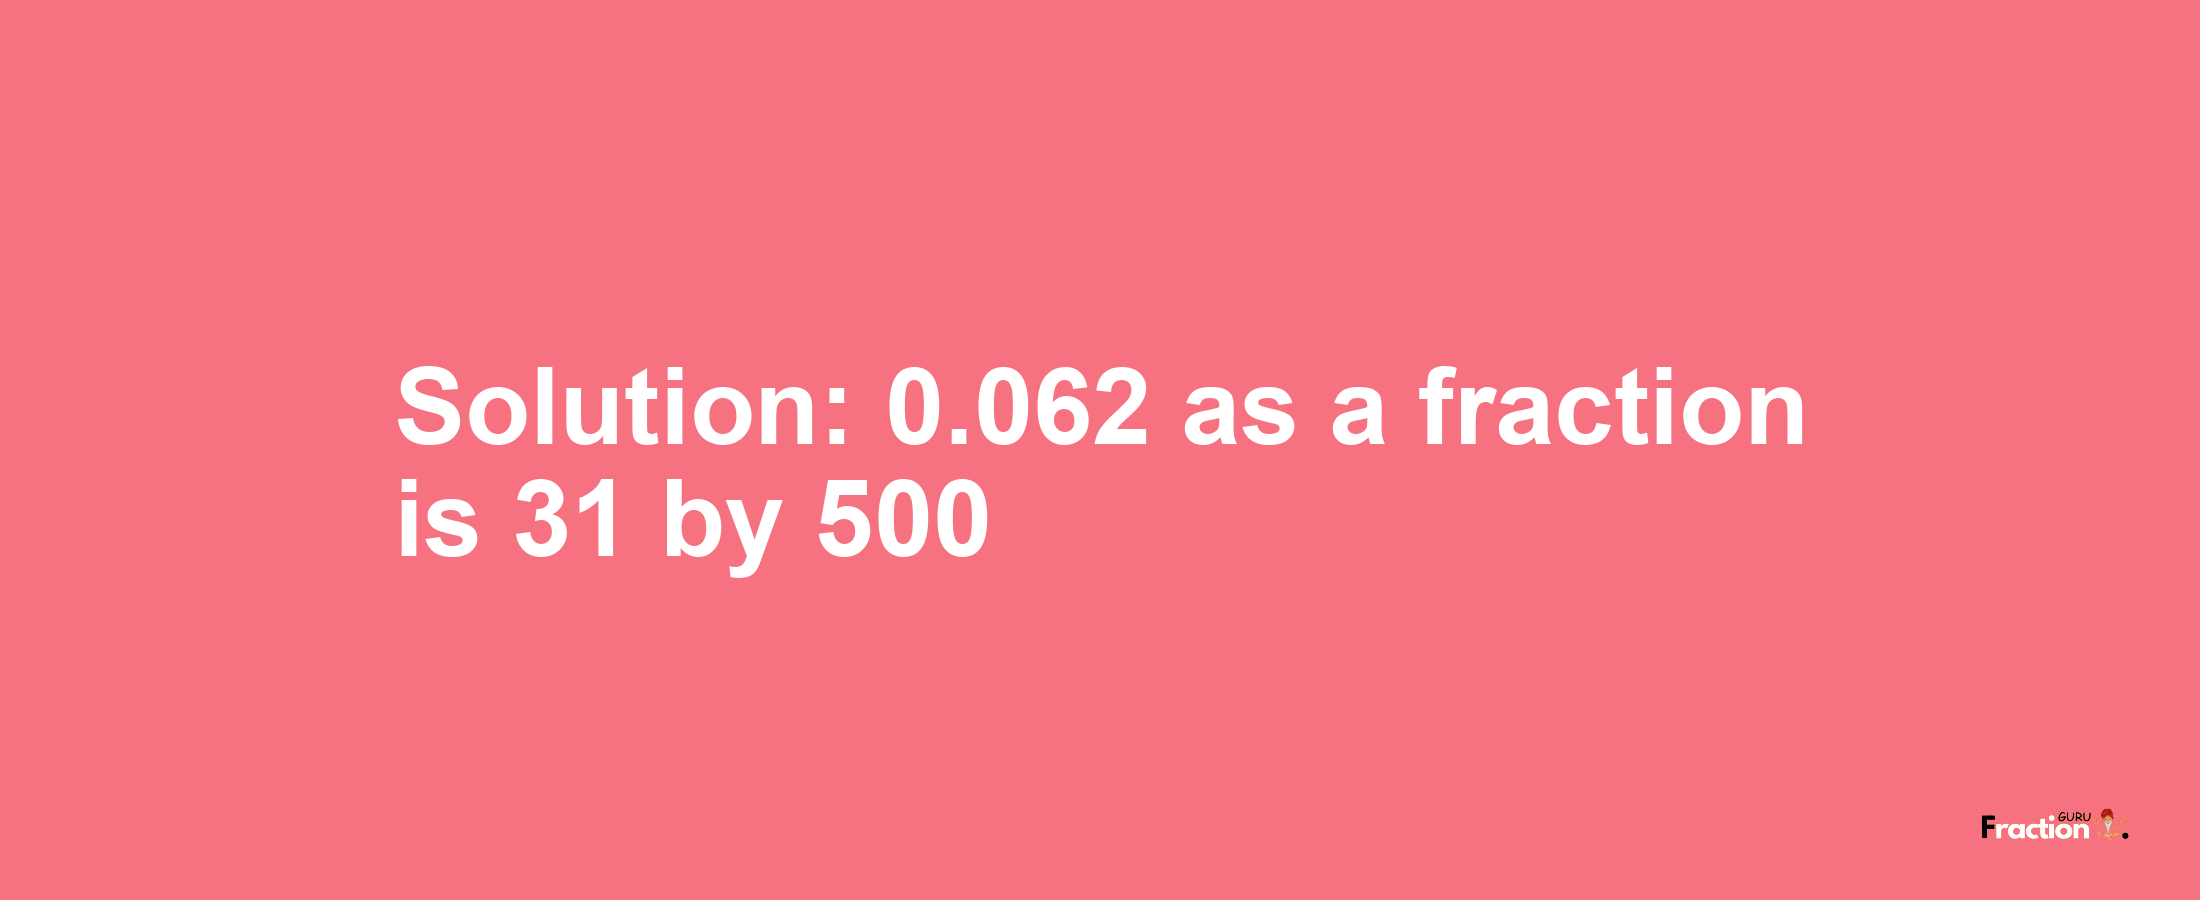 Solution:0.062 as a fraction is 31/500